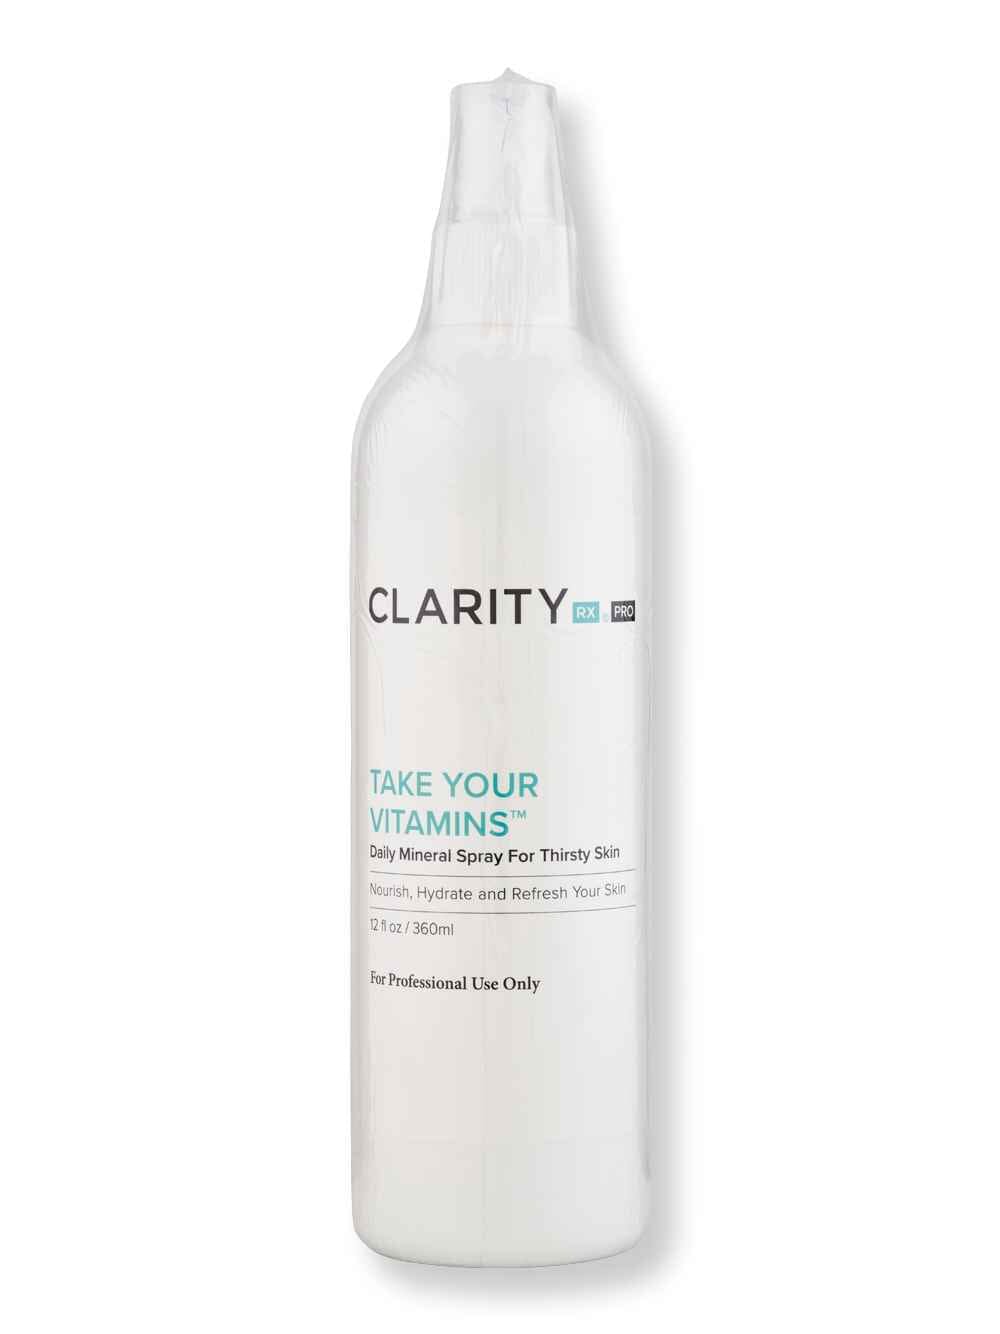 ClarityRx ClarityRx Take Your Vitamins Daily Mineral Spray For Thirsty Skin 12 oz Face Mists & Essences 